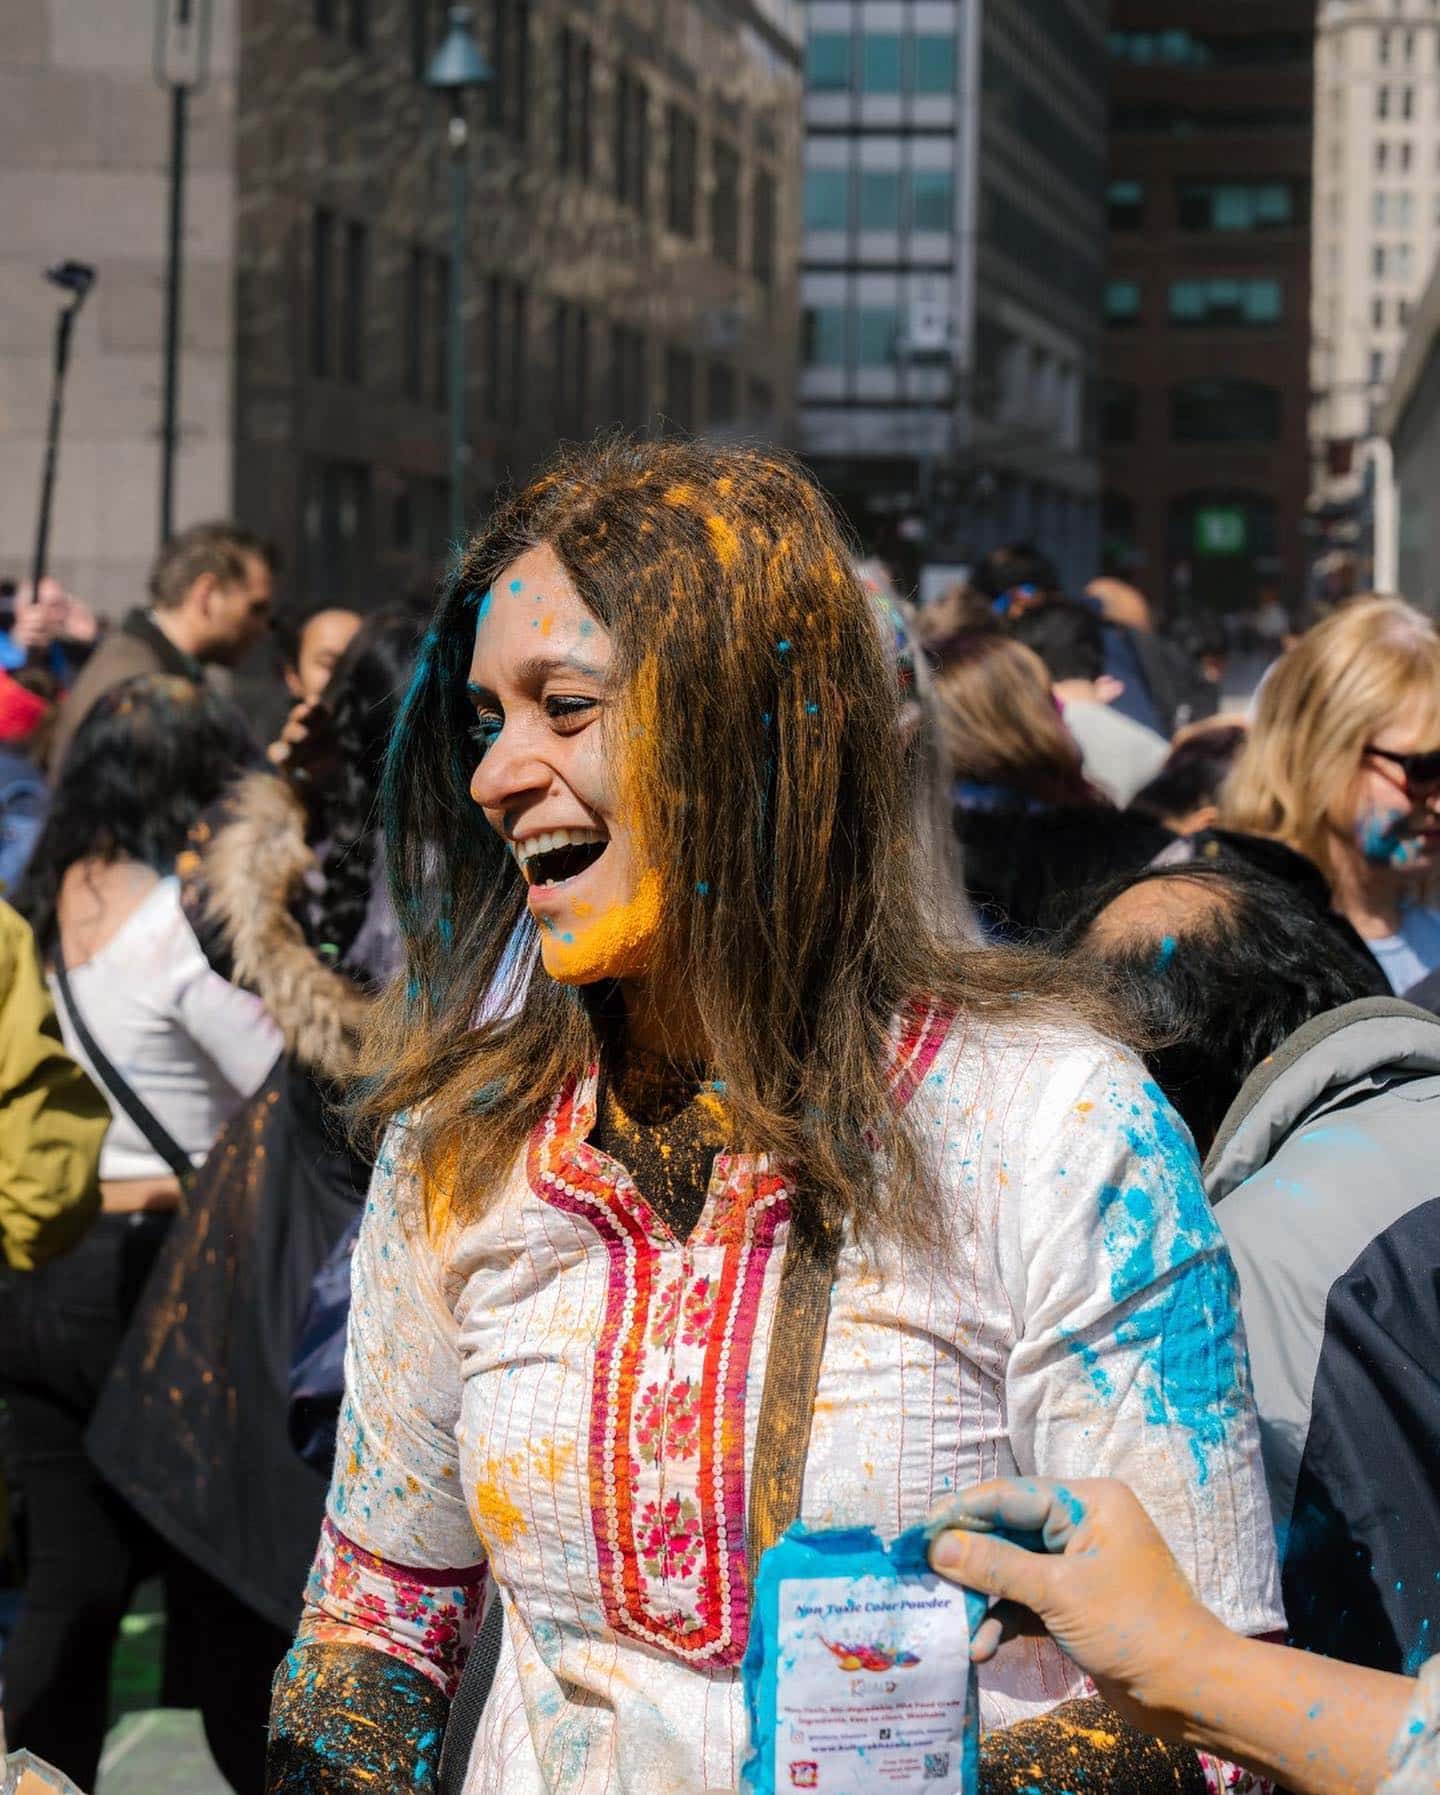 Thank you to everyone who celebrated Holi at #TheSeaport. It was an afternoon filled with light, laughter and love 🖤